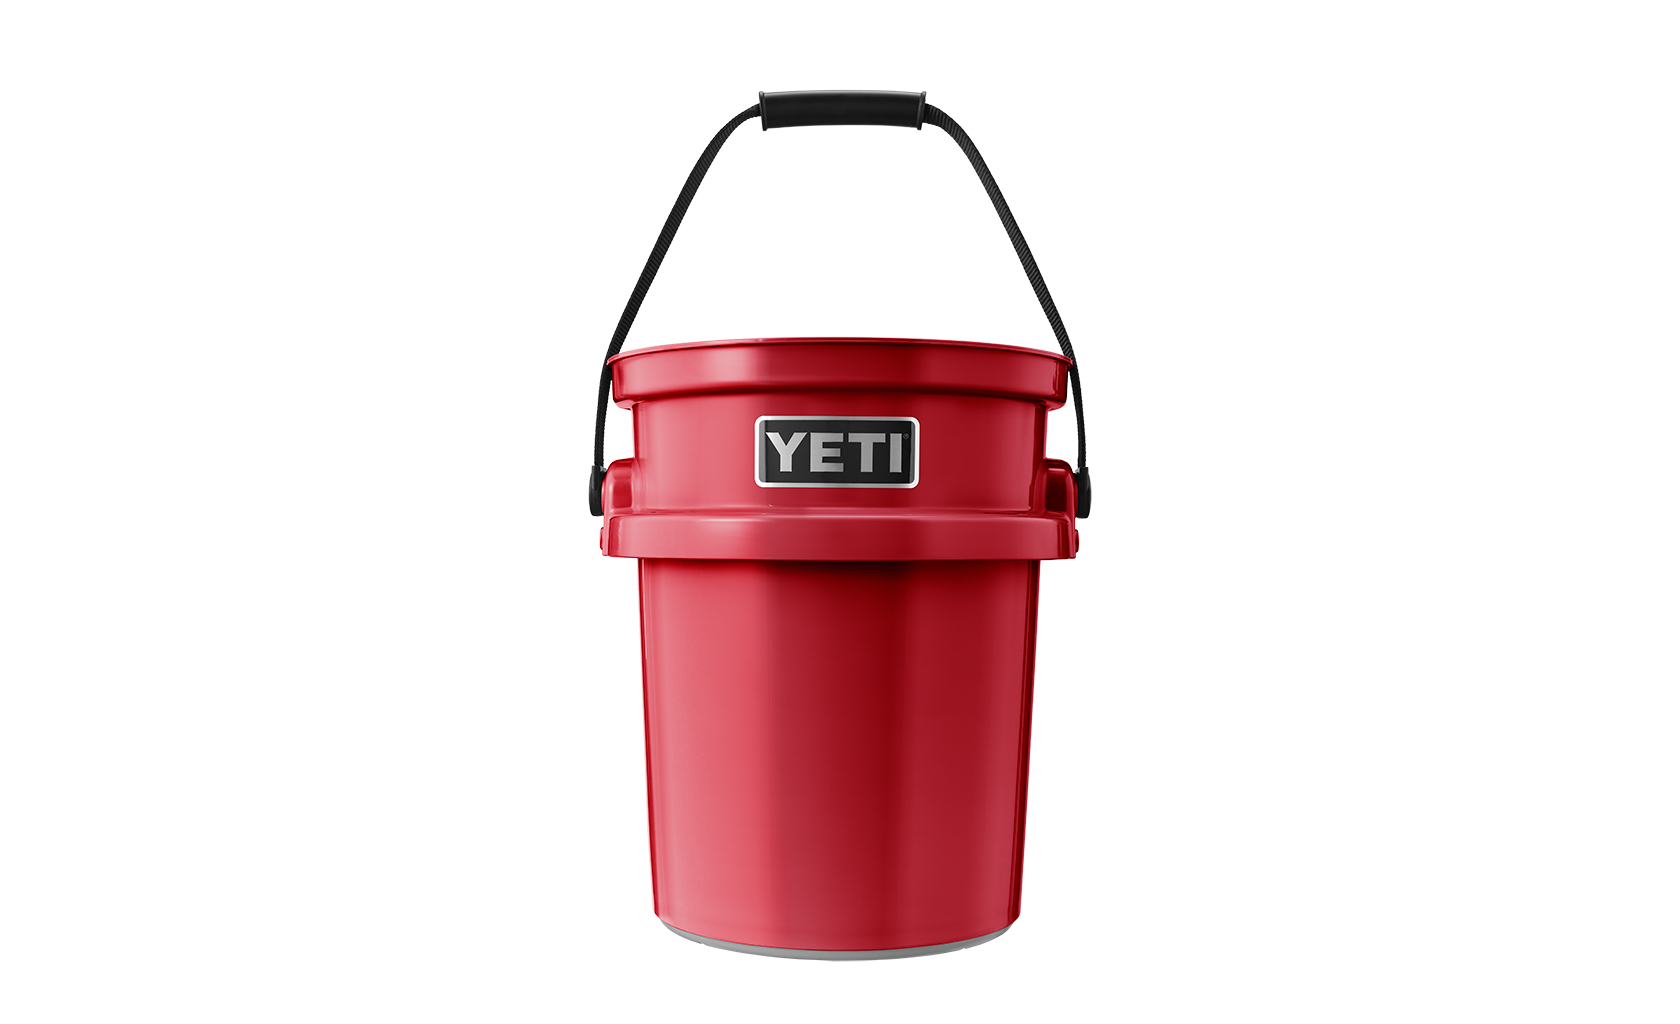 https://www.yeti.com/on/demandware.static/-/Sites-masterCatalog_Yeti/default/dw4915c959/images/pdp-Loadout/5%20Gallon%20Bucket/Harvest-Red/Loadout_Bucket_Harvest_Red_Front_3622_Layers_F_1680x1024.jpg